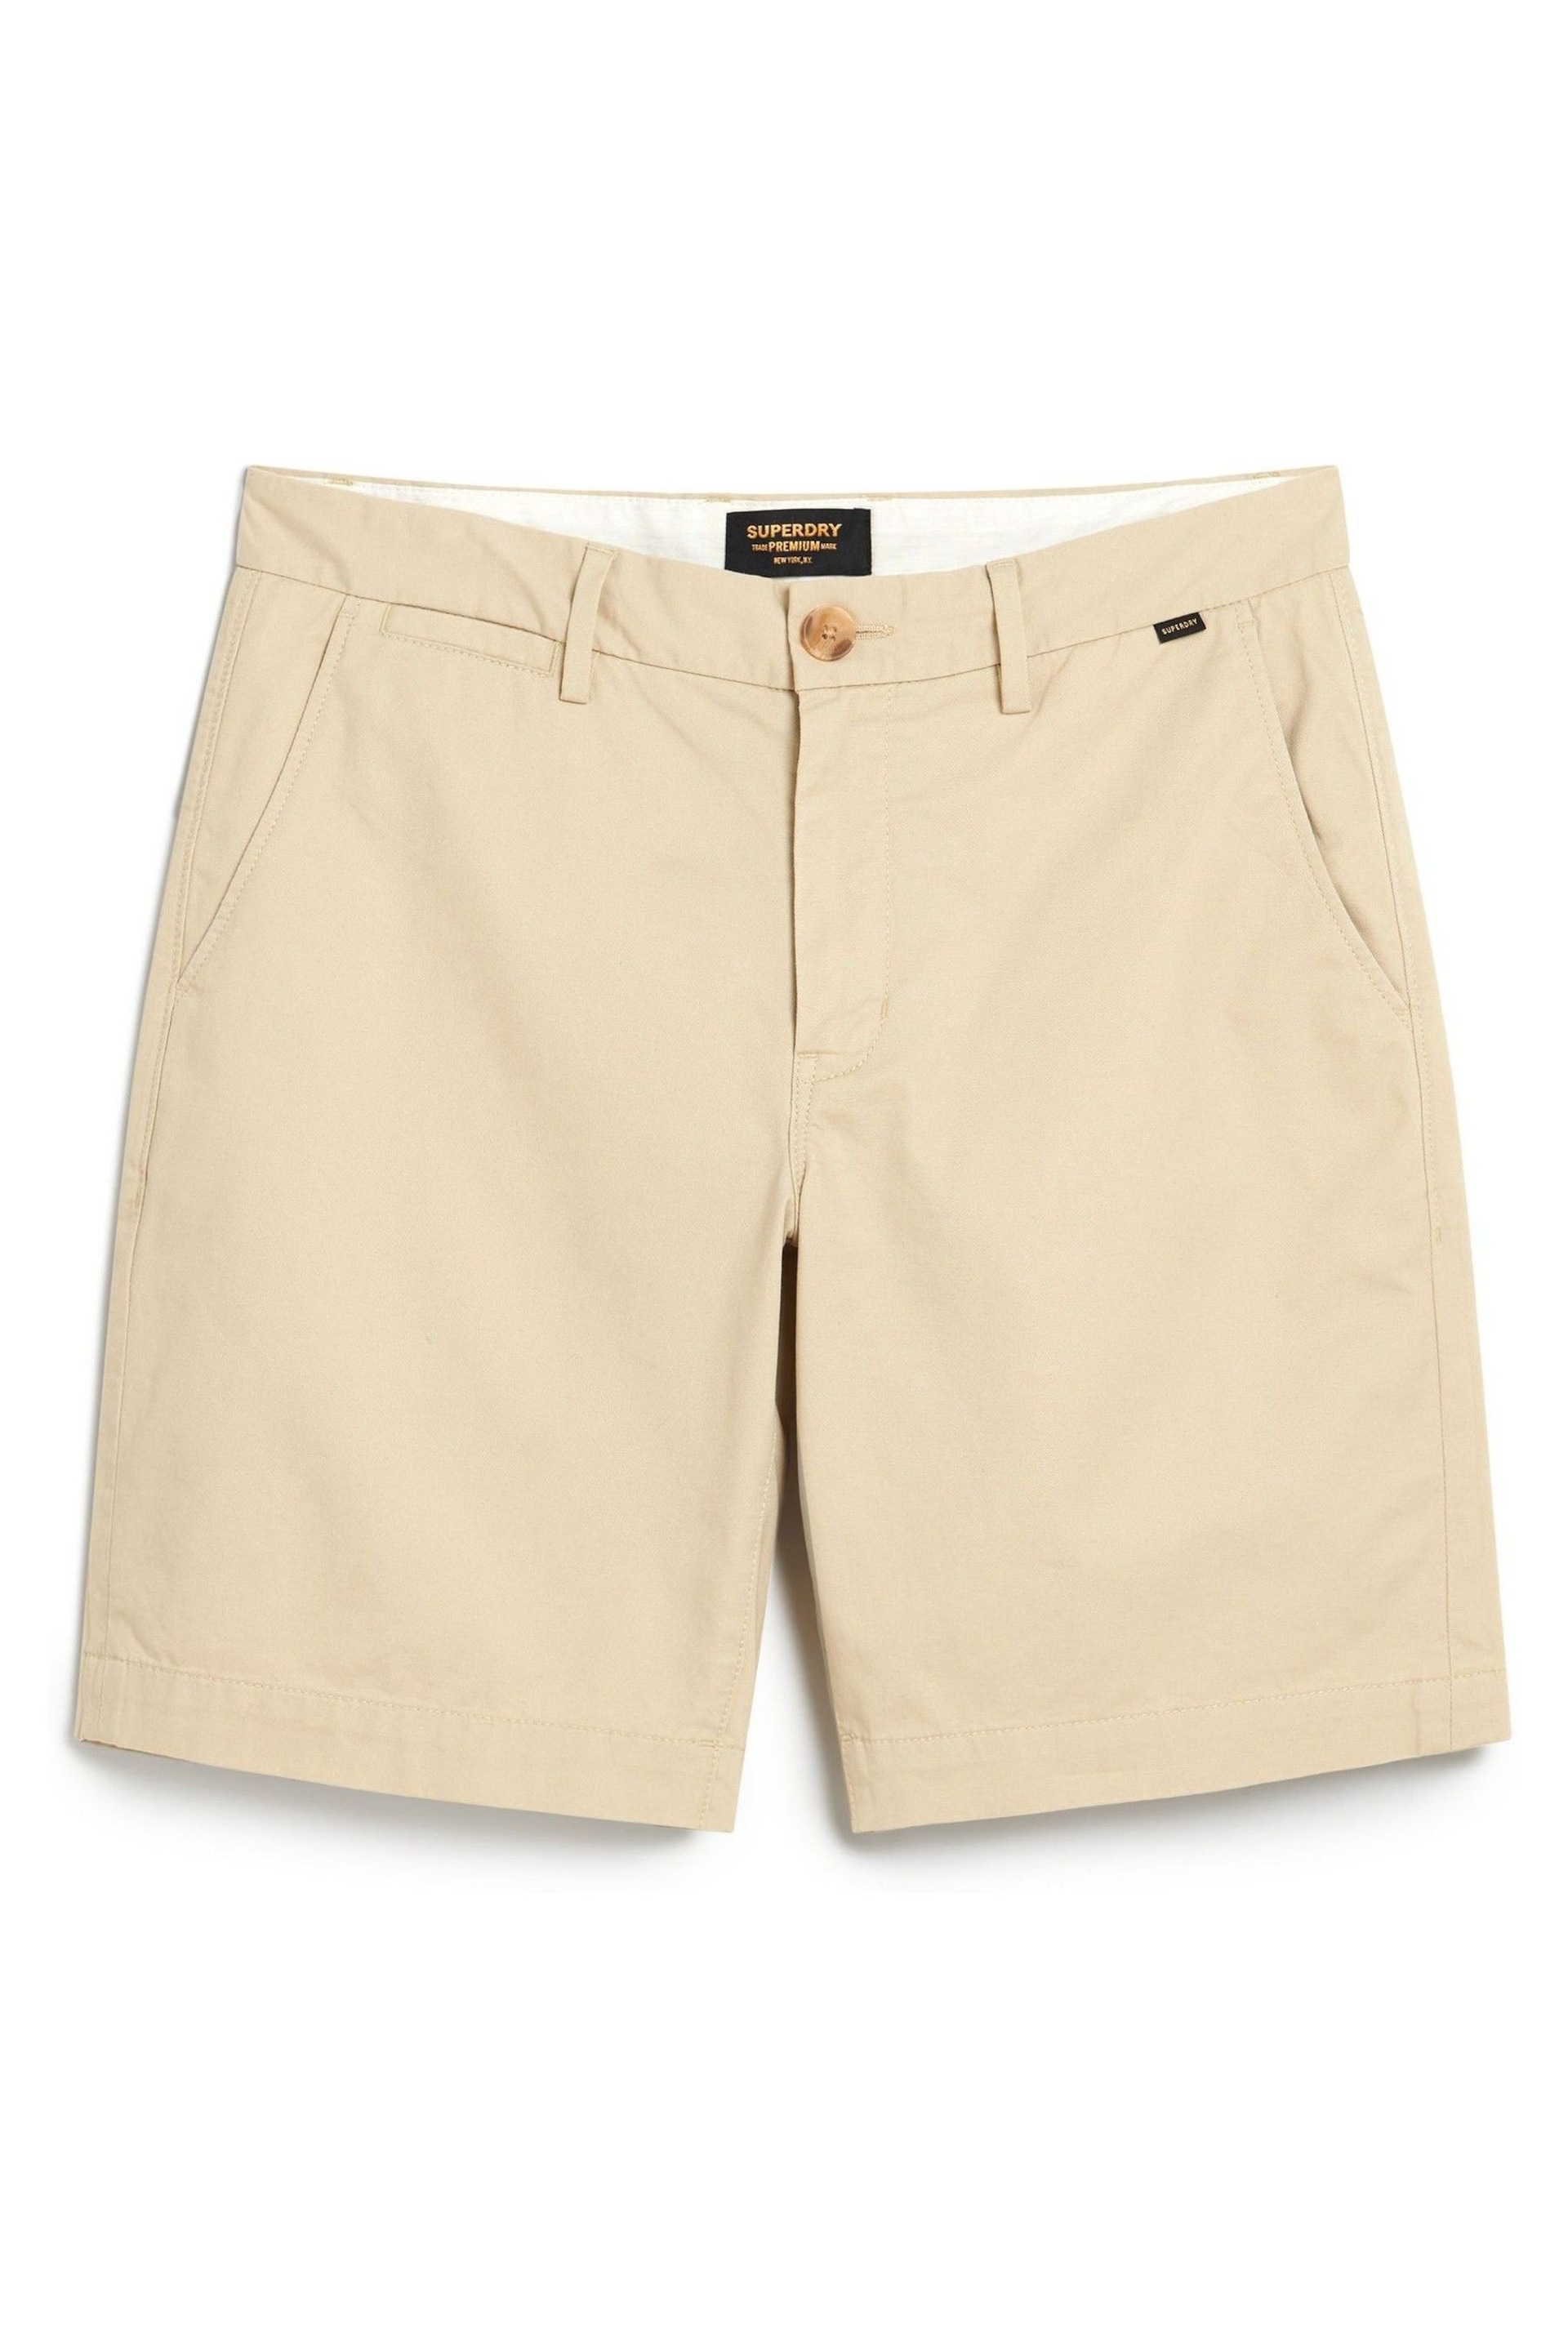 Superdry Brown Stretch Chinos Shorts - Image 7 of 8